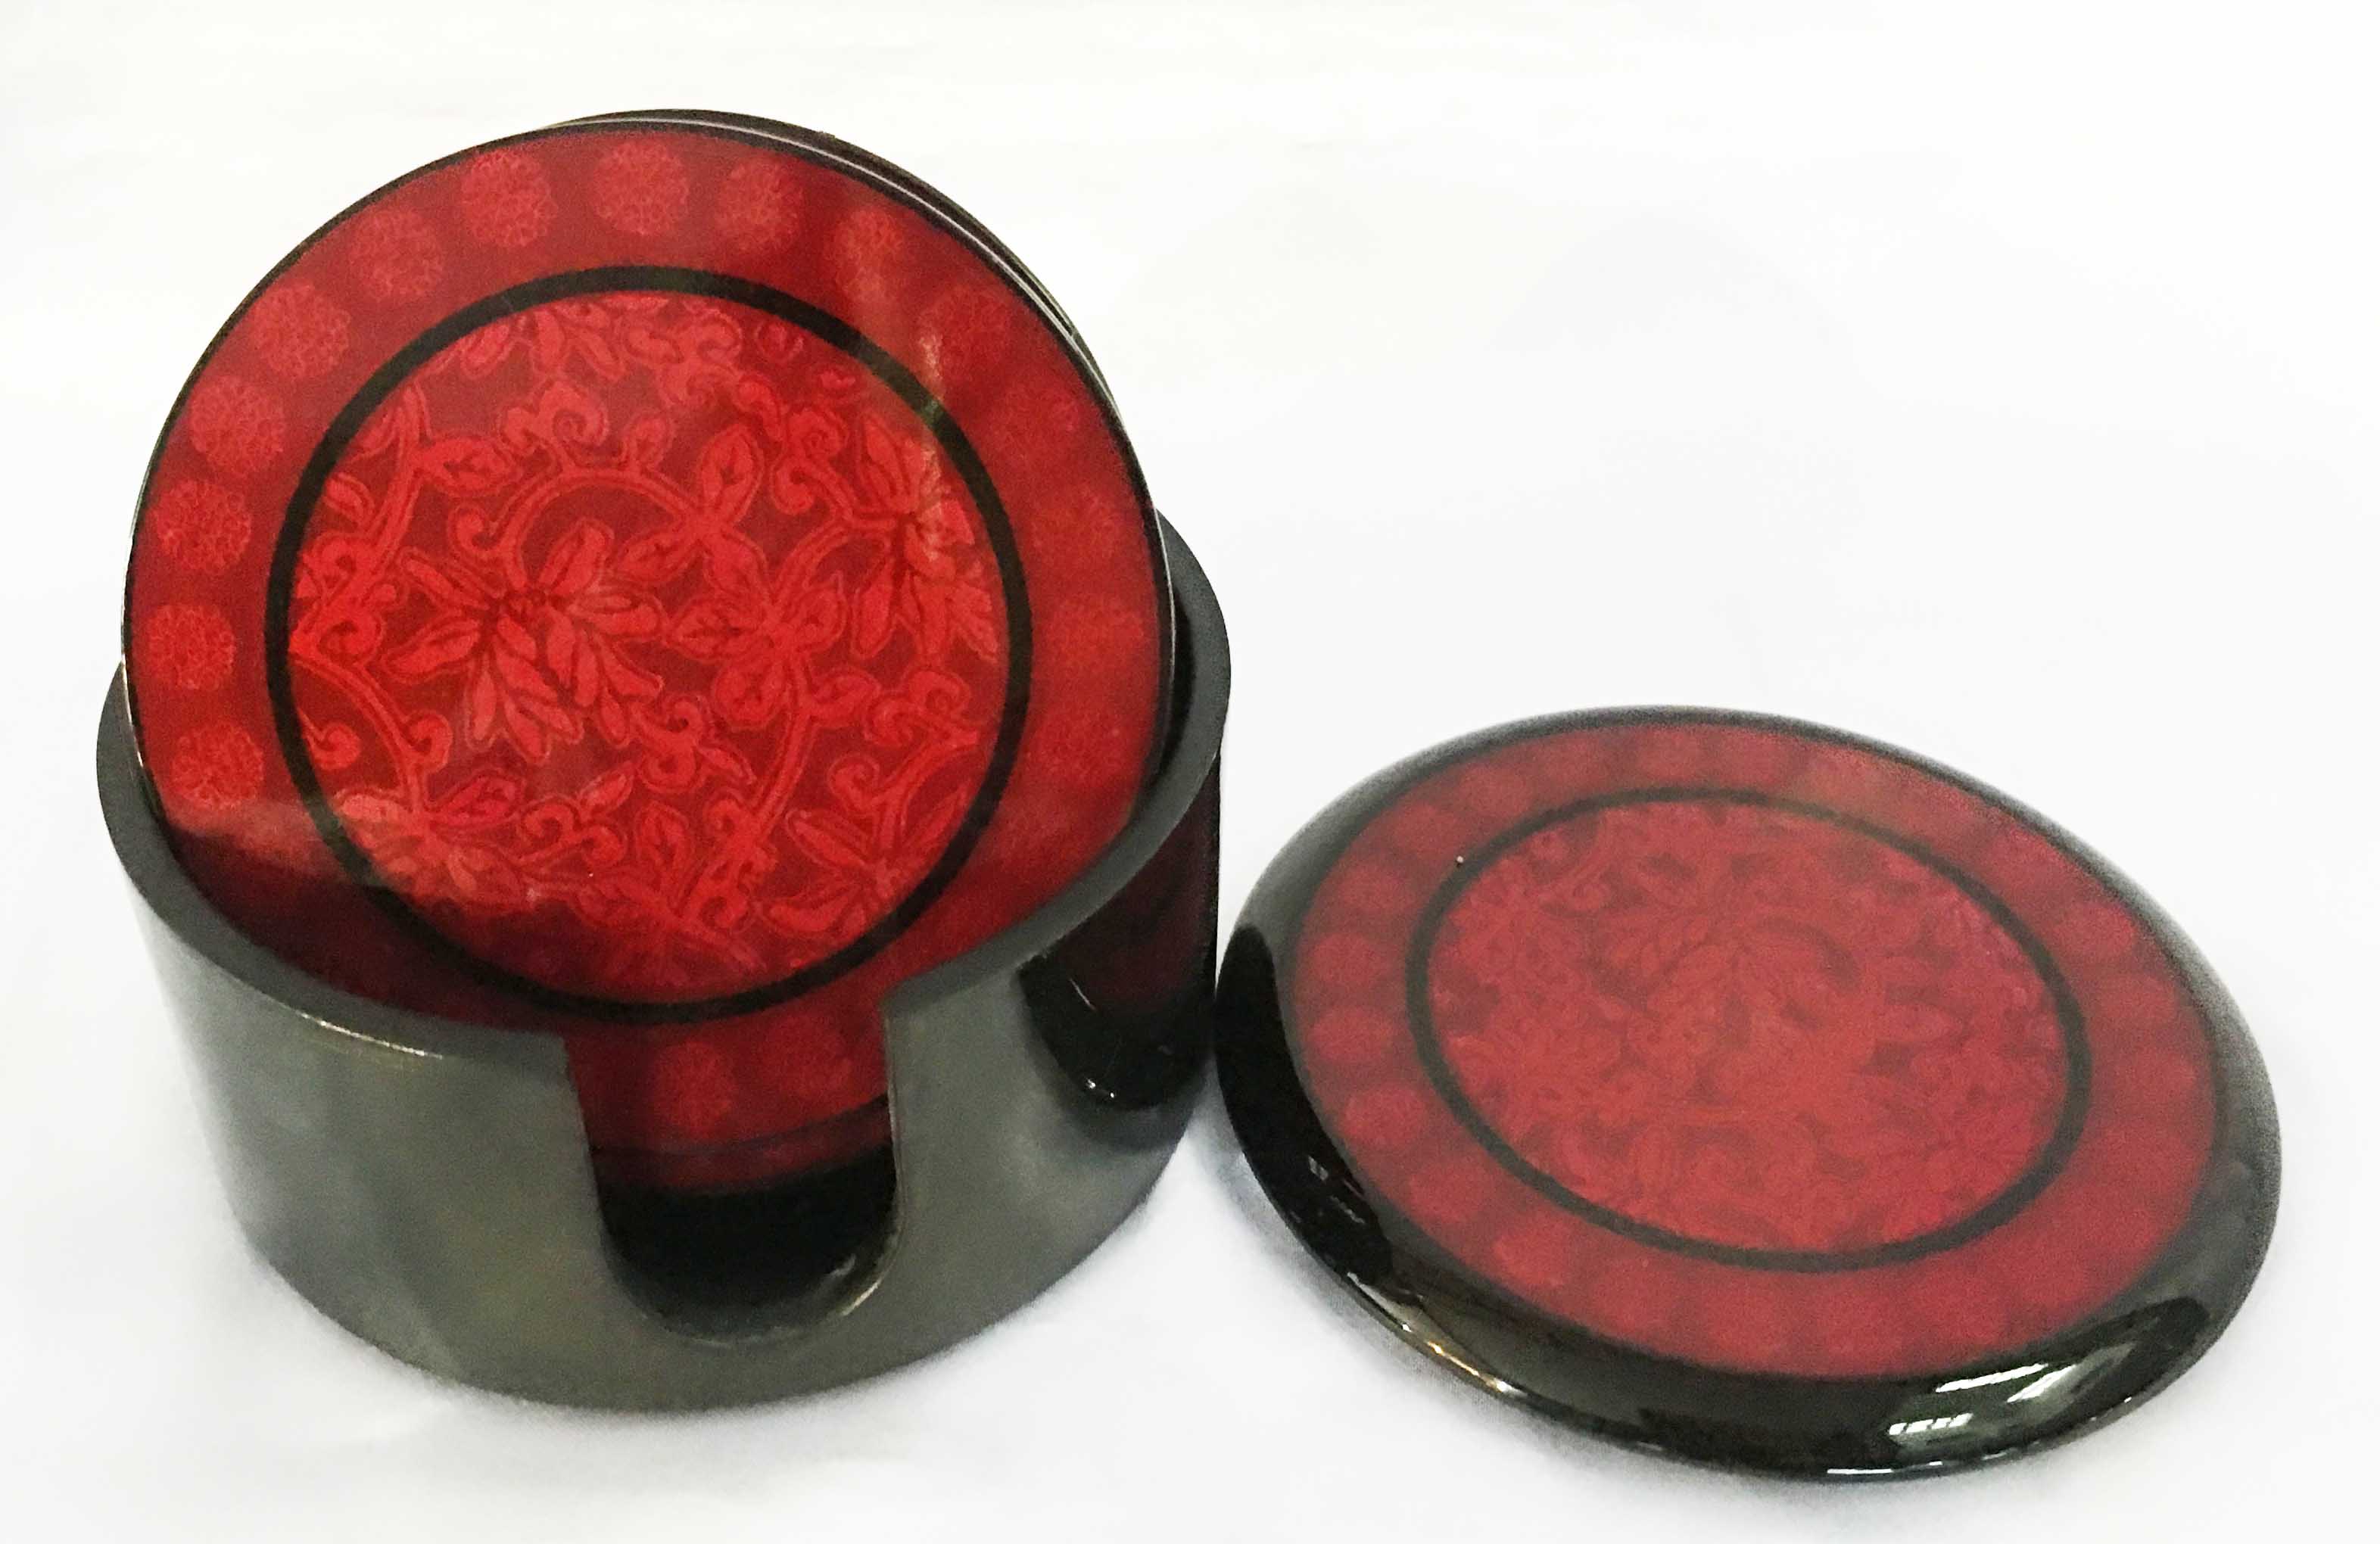 ROUNDED COASTERS painted